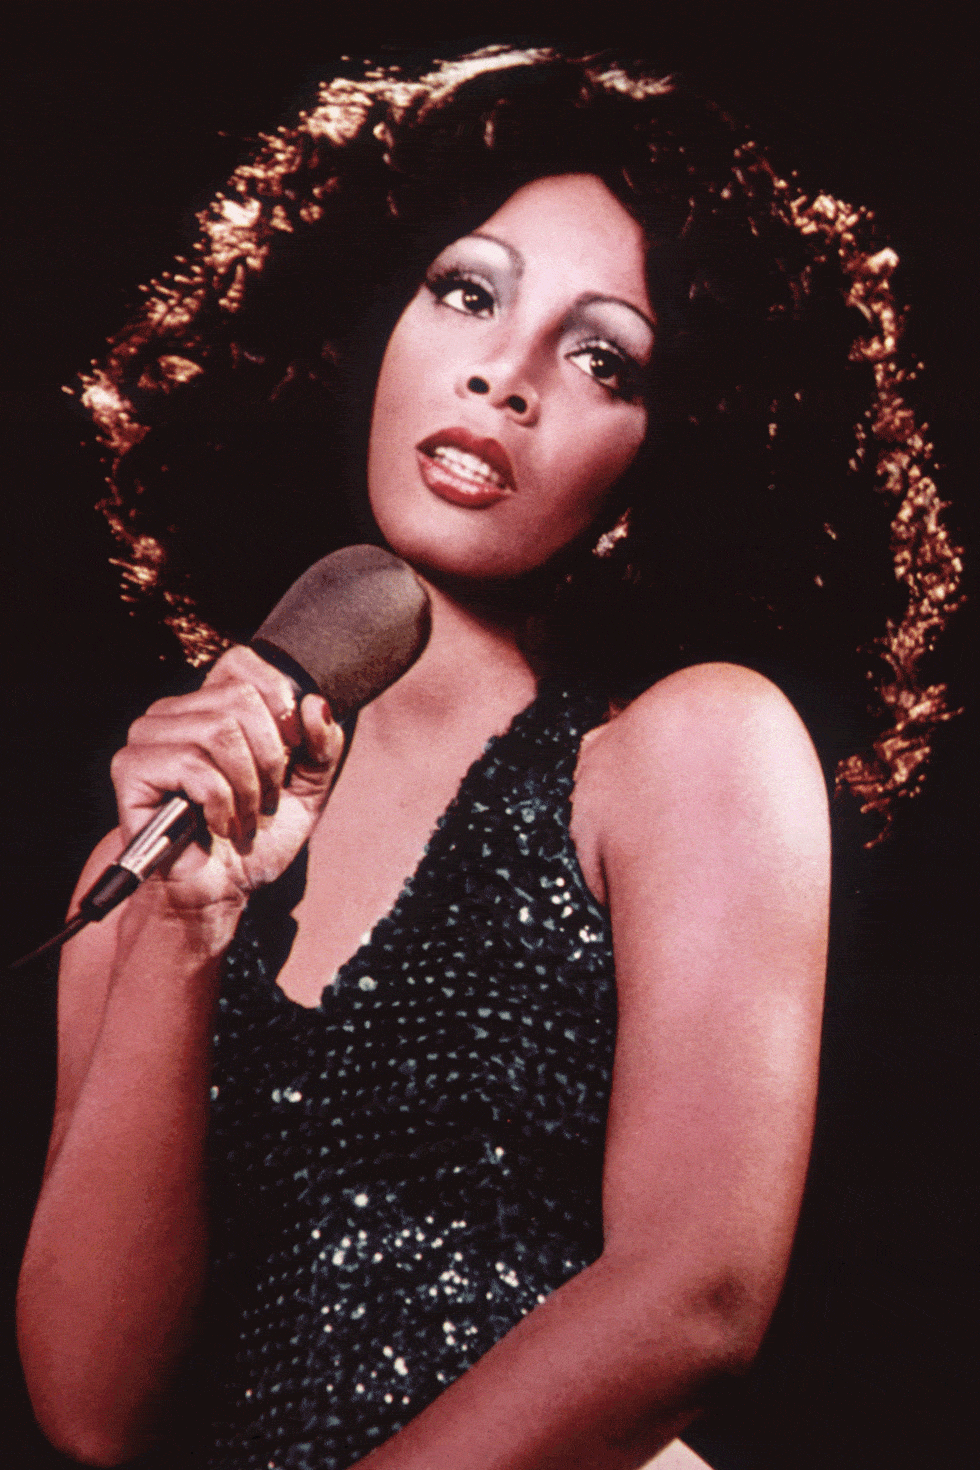 <p>Summer kicked off her legacy as the "Queen of Disco" in '75, with the release of "Love to Love You Baby."</p>